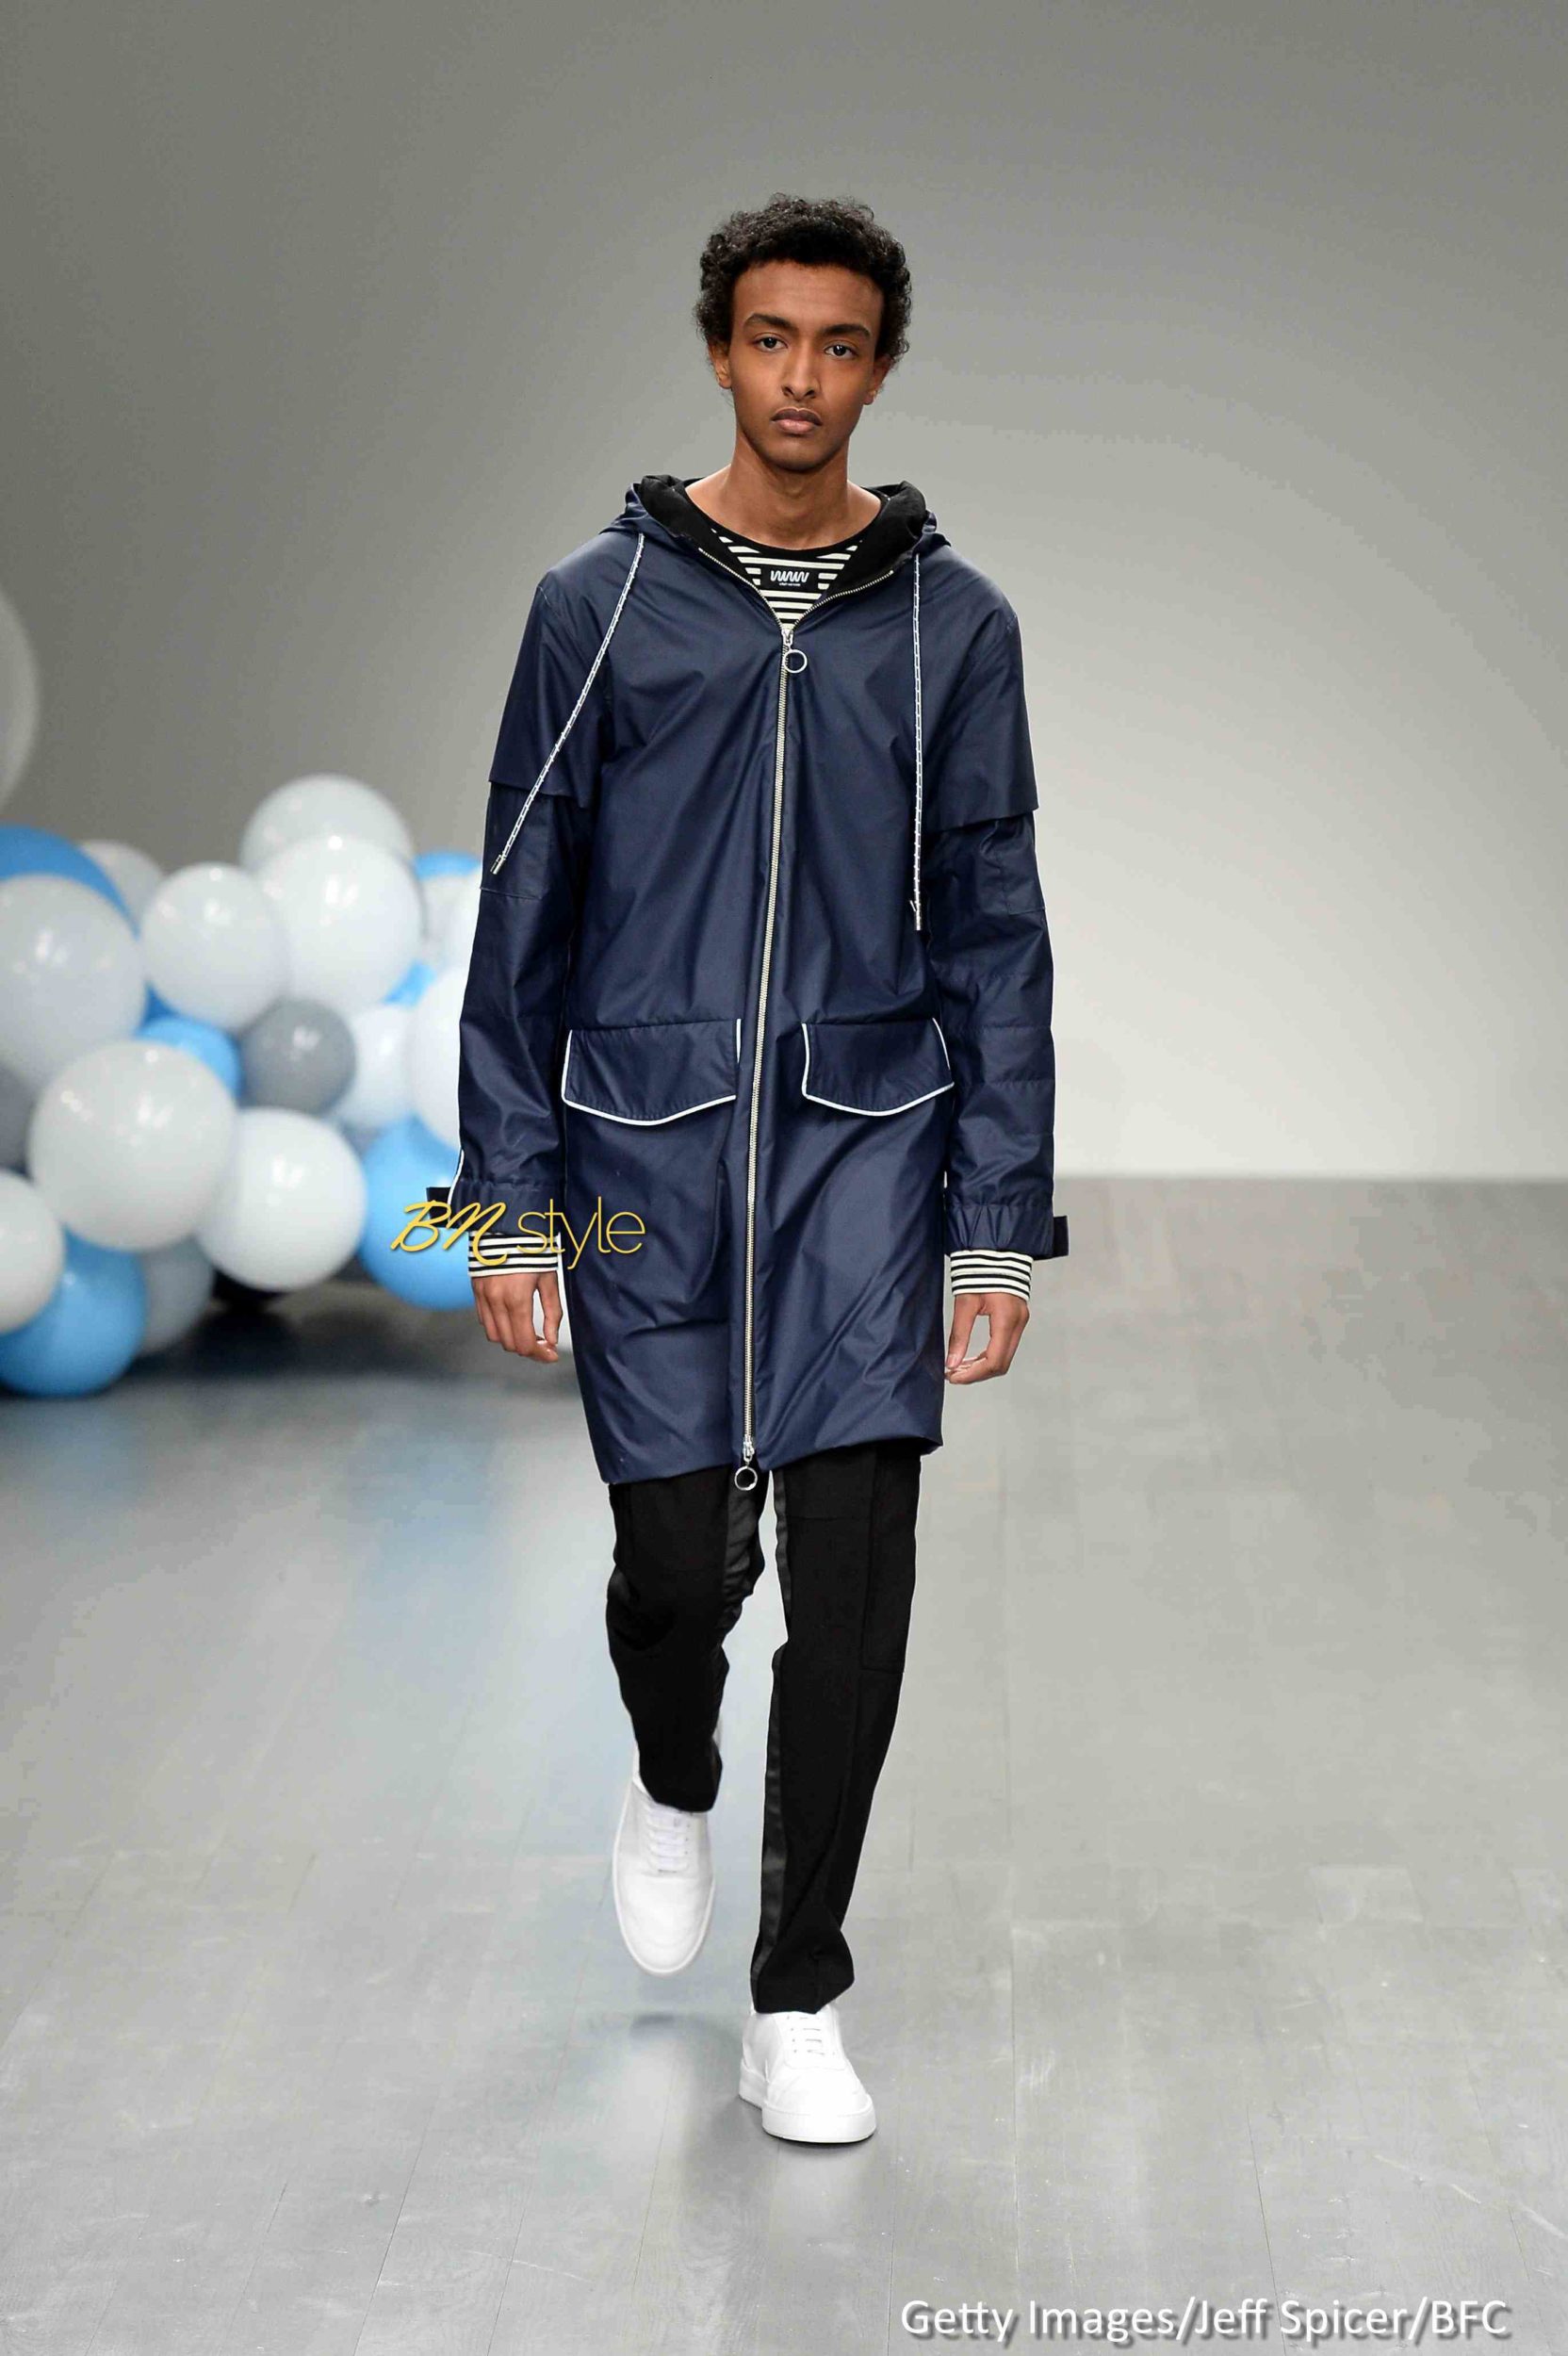 Tinie Tempah unveiled the Coolest Collection at London Fashion Week Men’s